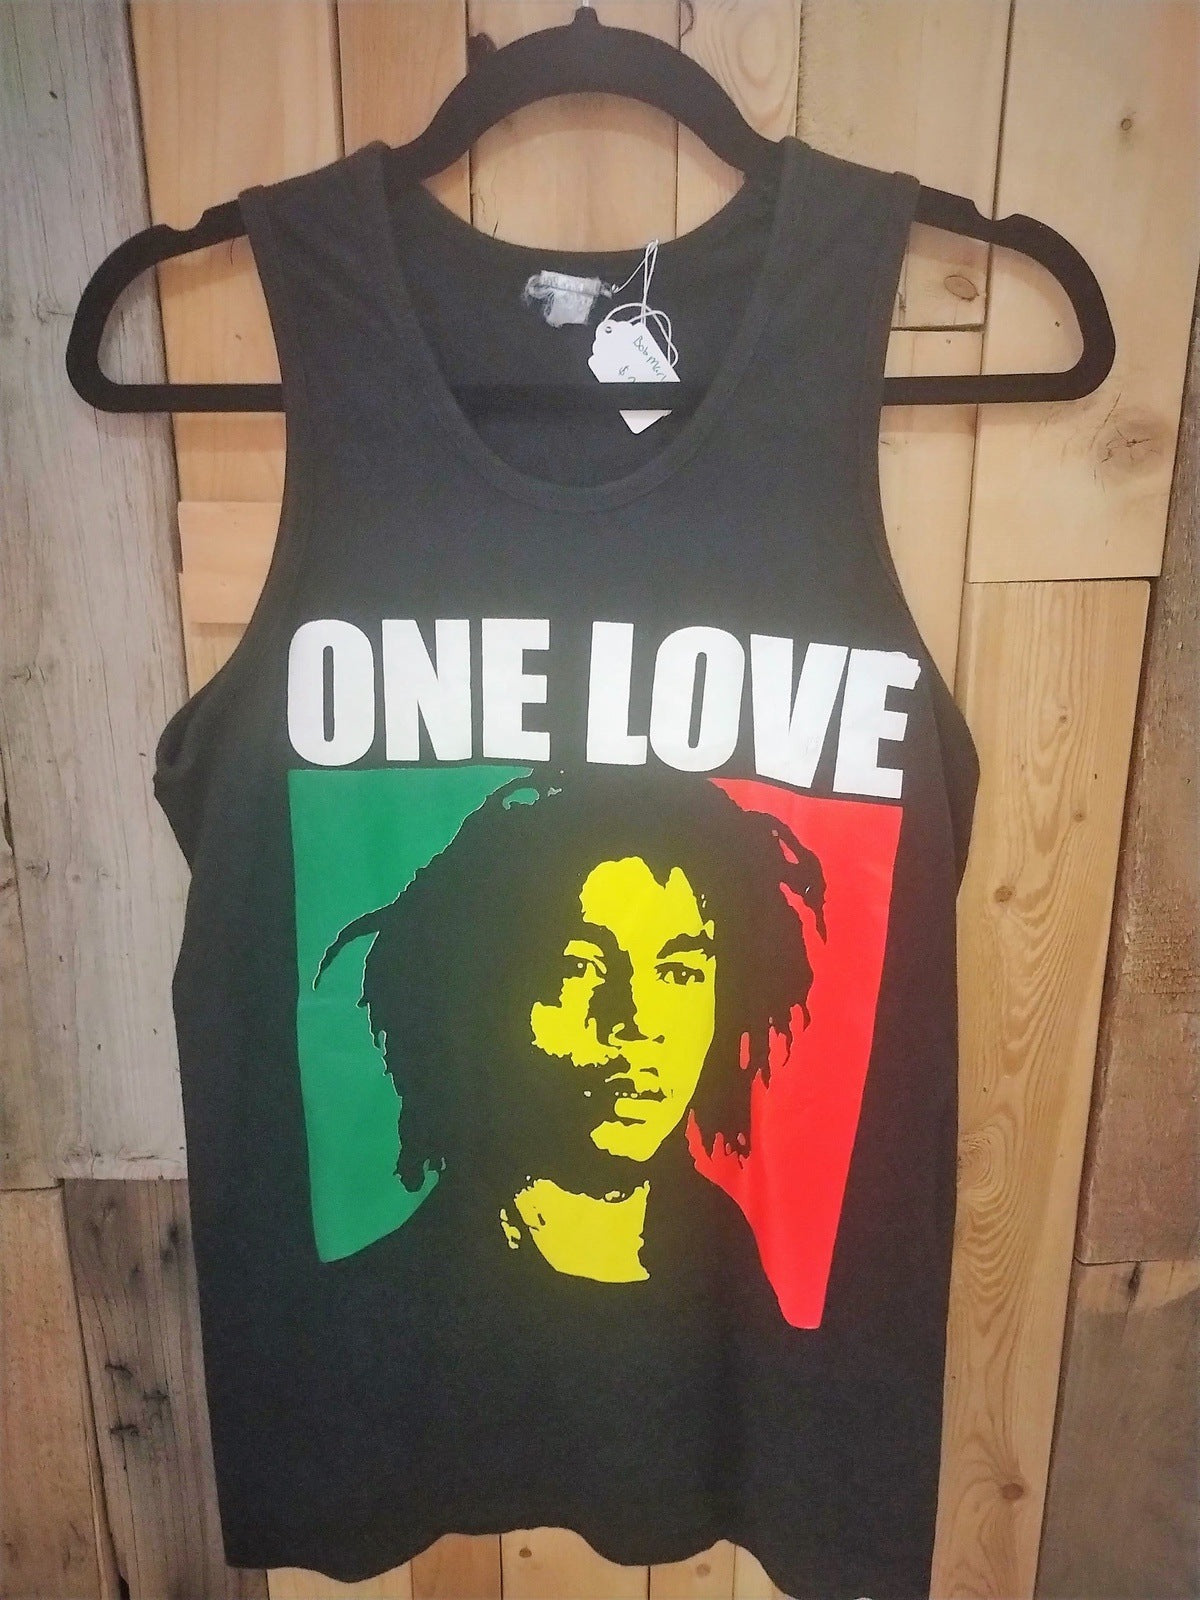 Bob Marley "One Love" Tank Top Size XS As Is